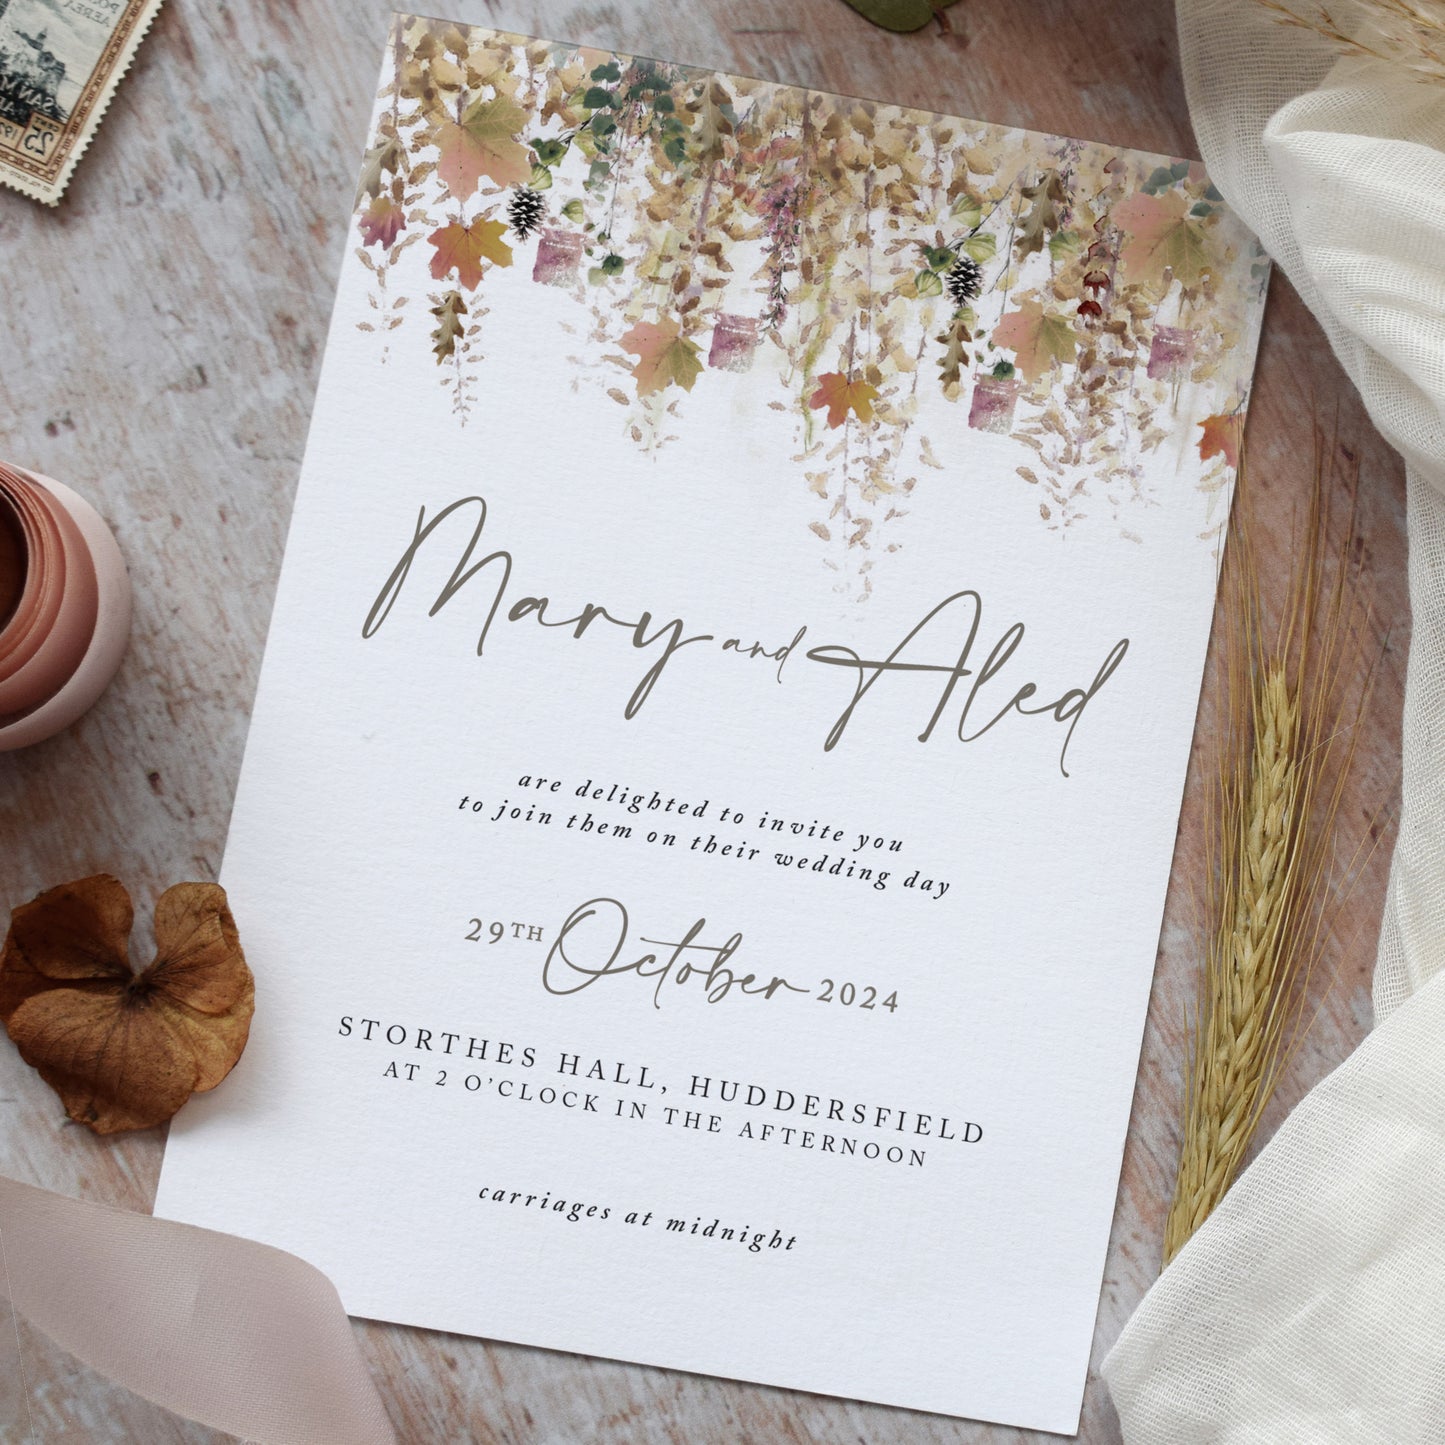 Autumn wedding invitations with rustic leaves